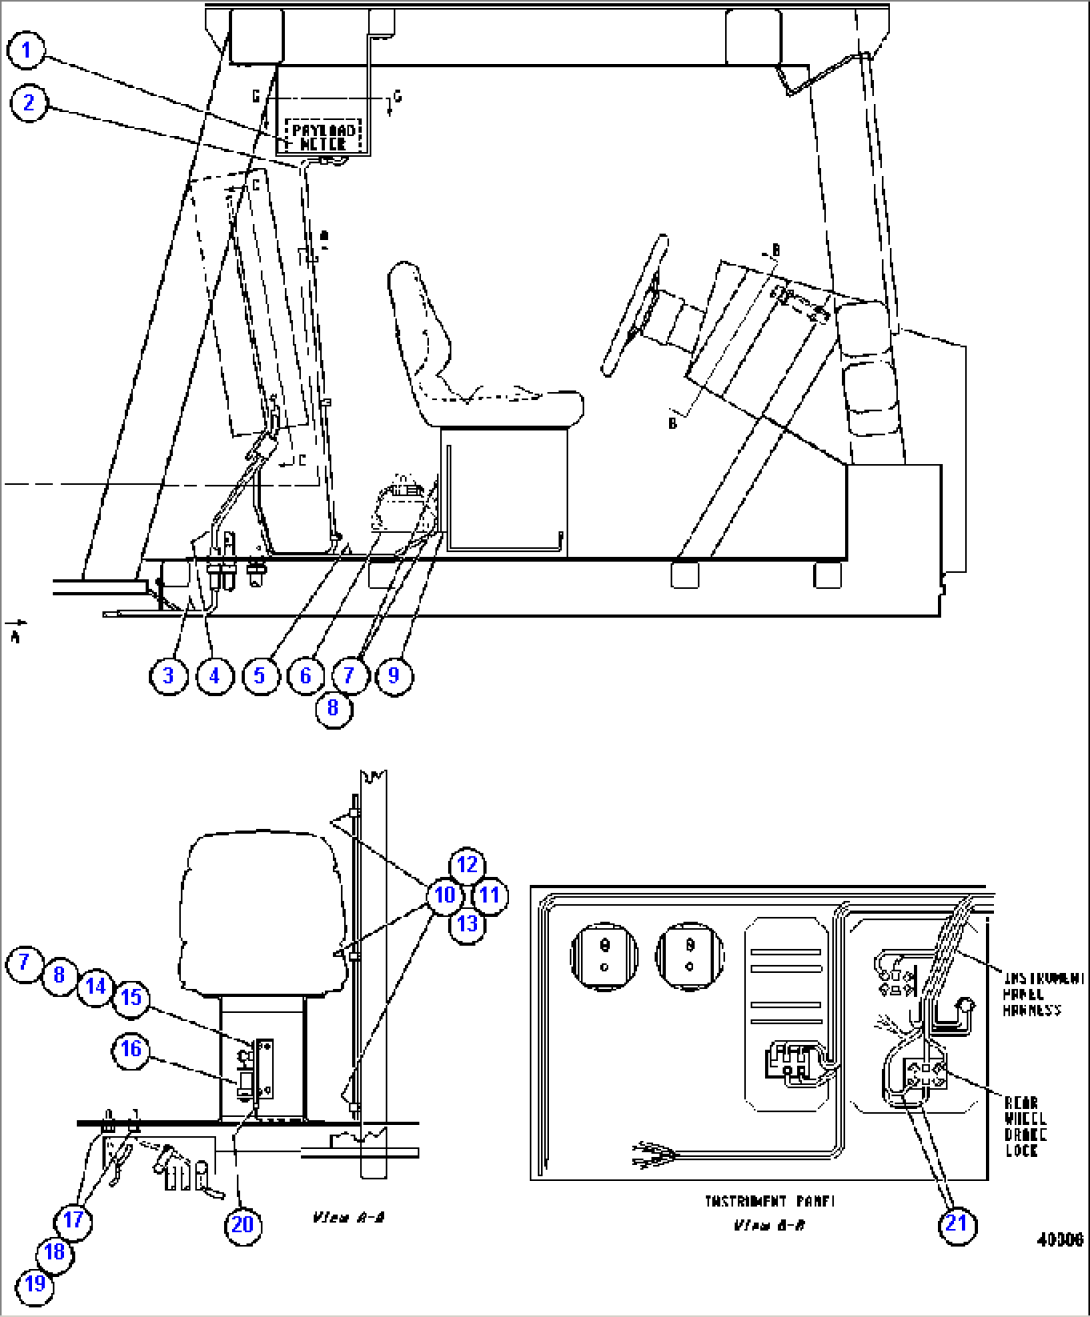 PAYLOAD METER/ON-BOARD WEIGHING SYSTEM - 1